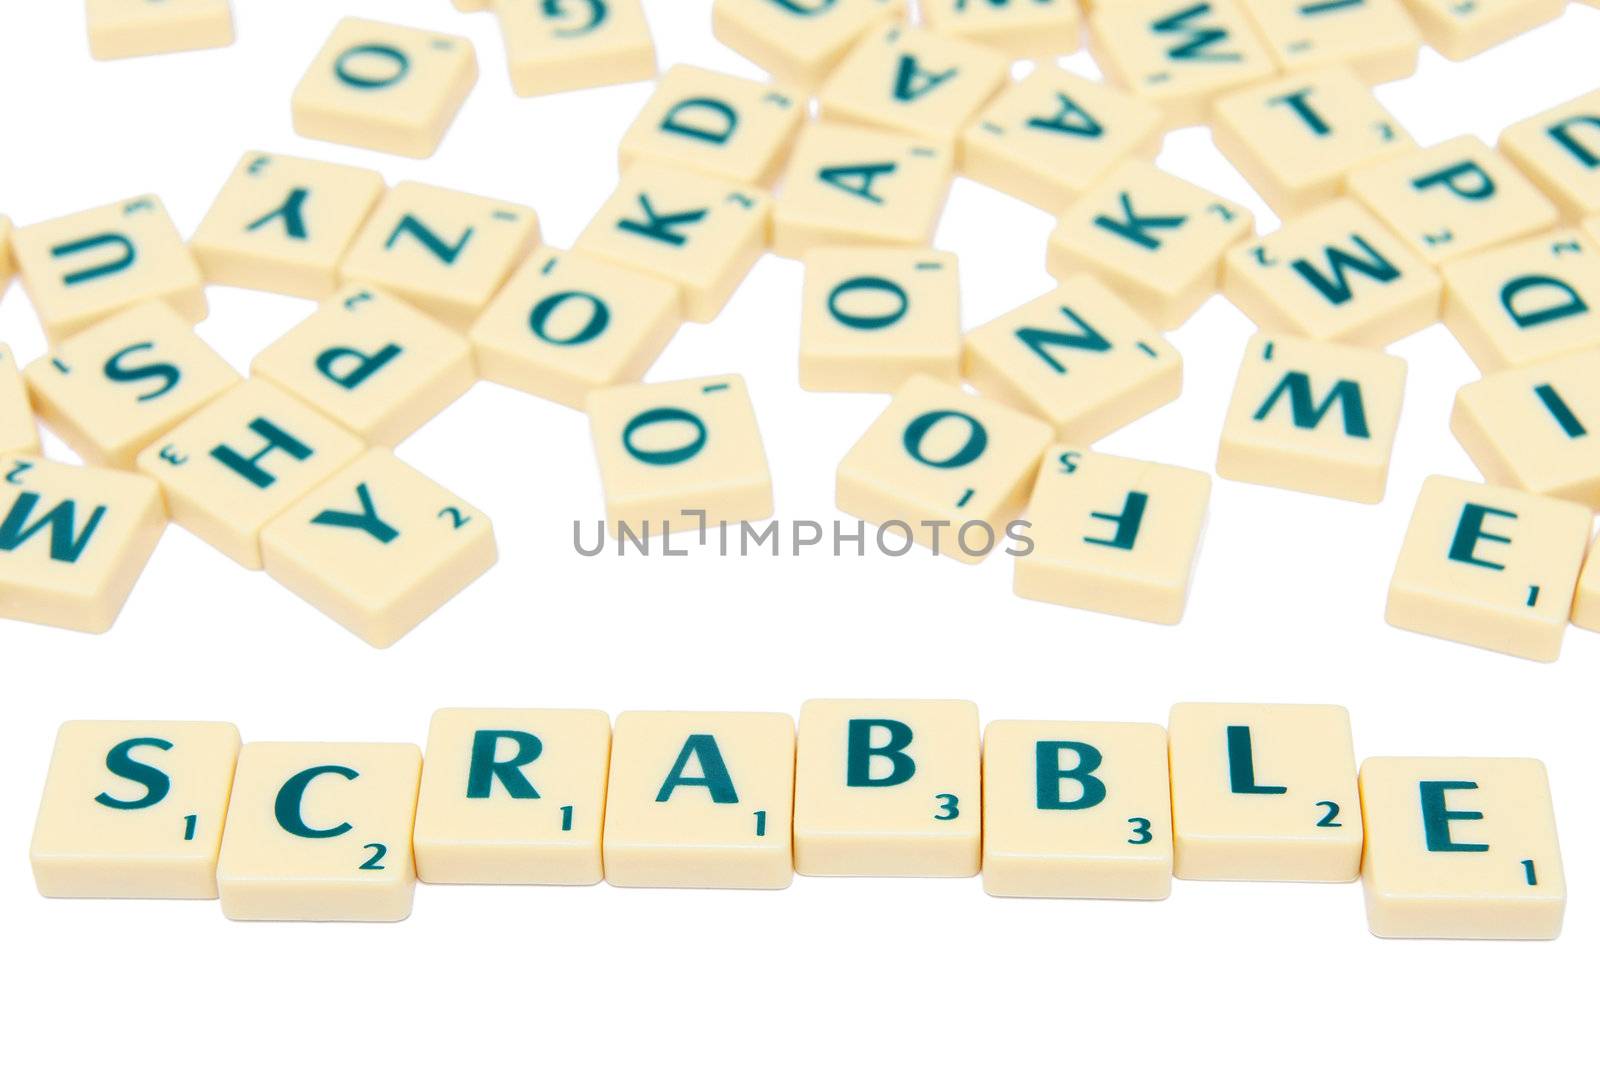 Scrabble tiles on the white background